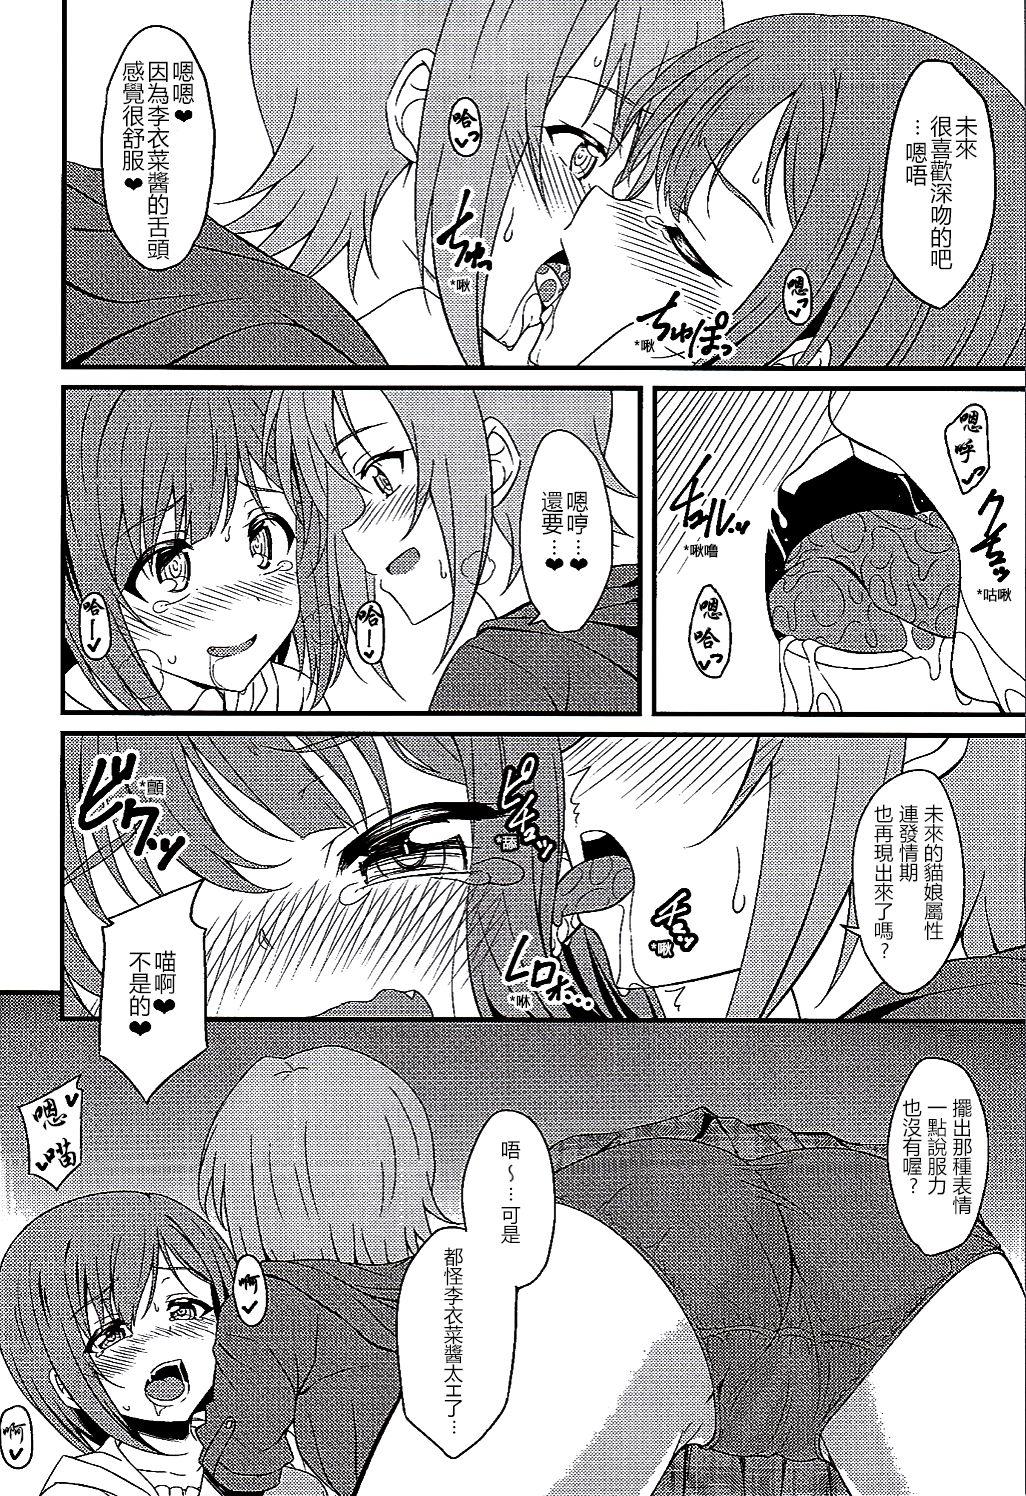 Hardcore Rough Sex The Cat's Meow - The idolmaster Ex Girlfriends - Page 6